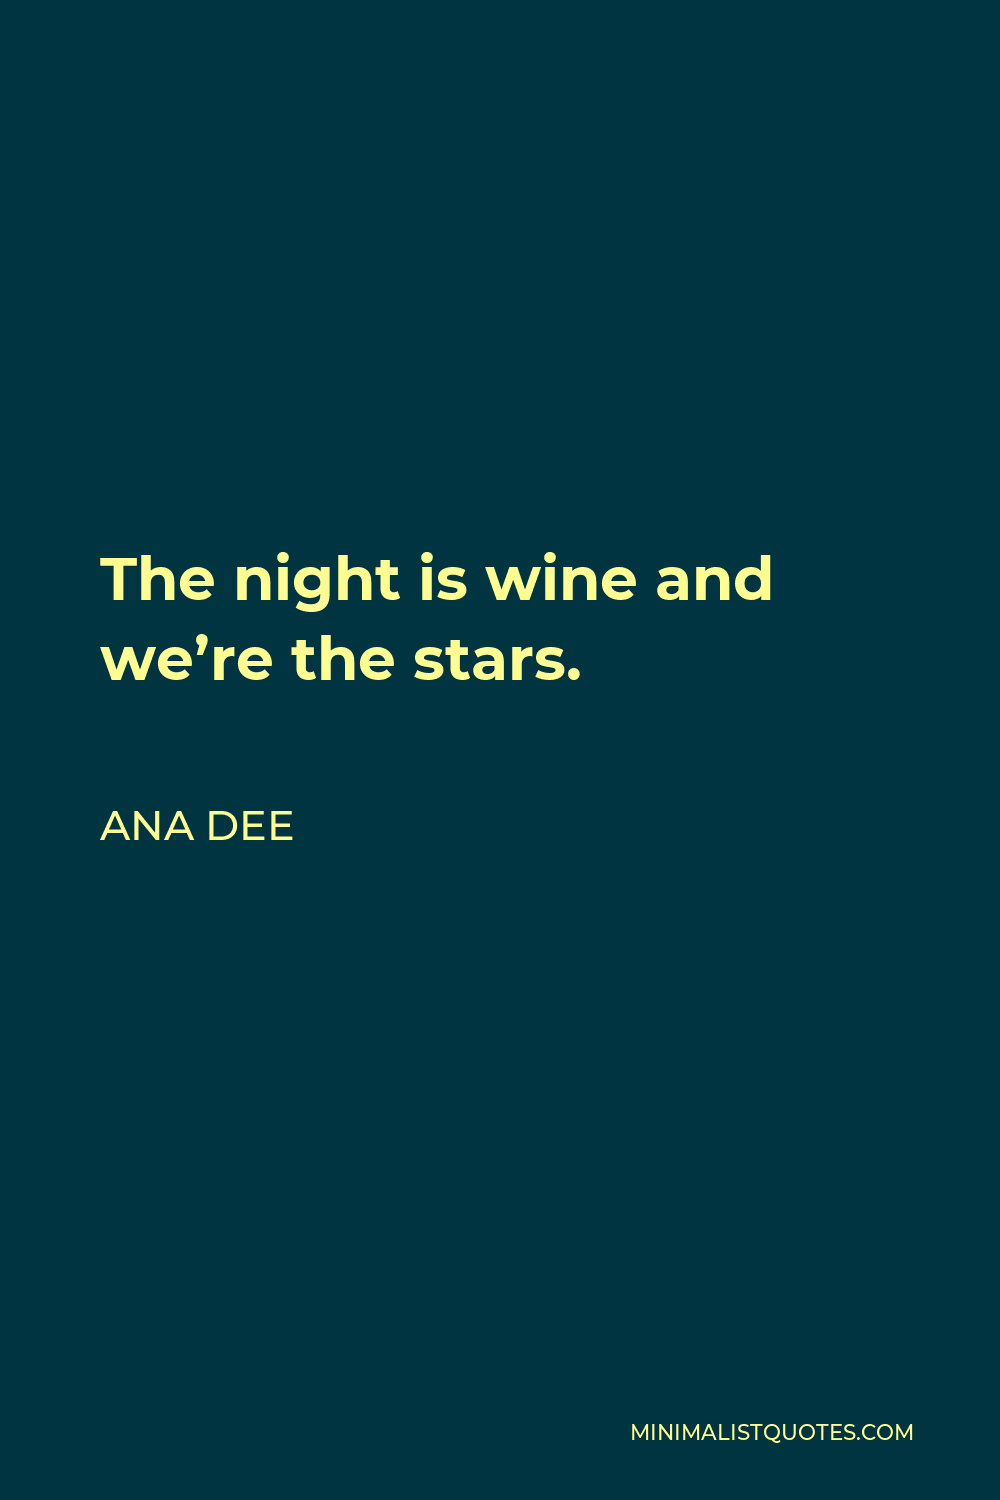 Ana Dee Quote - The night is wine and we’re the stars.